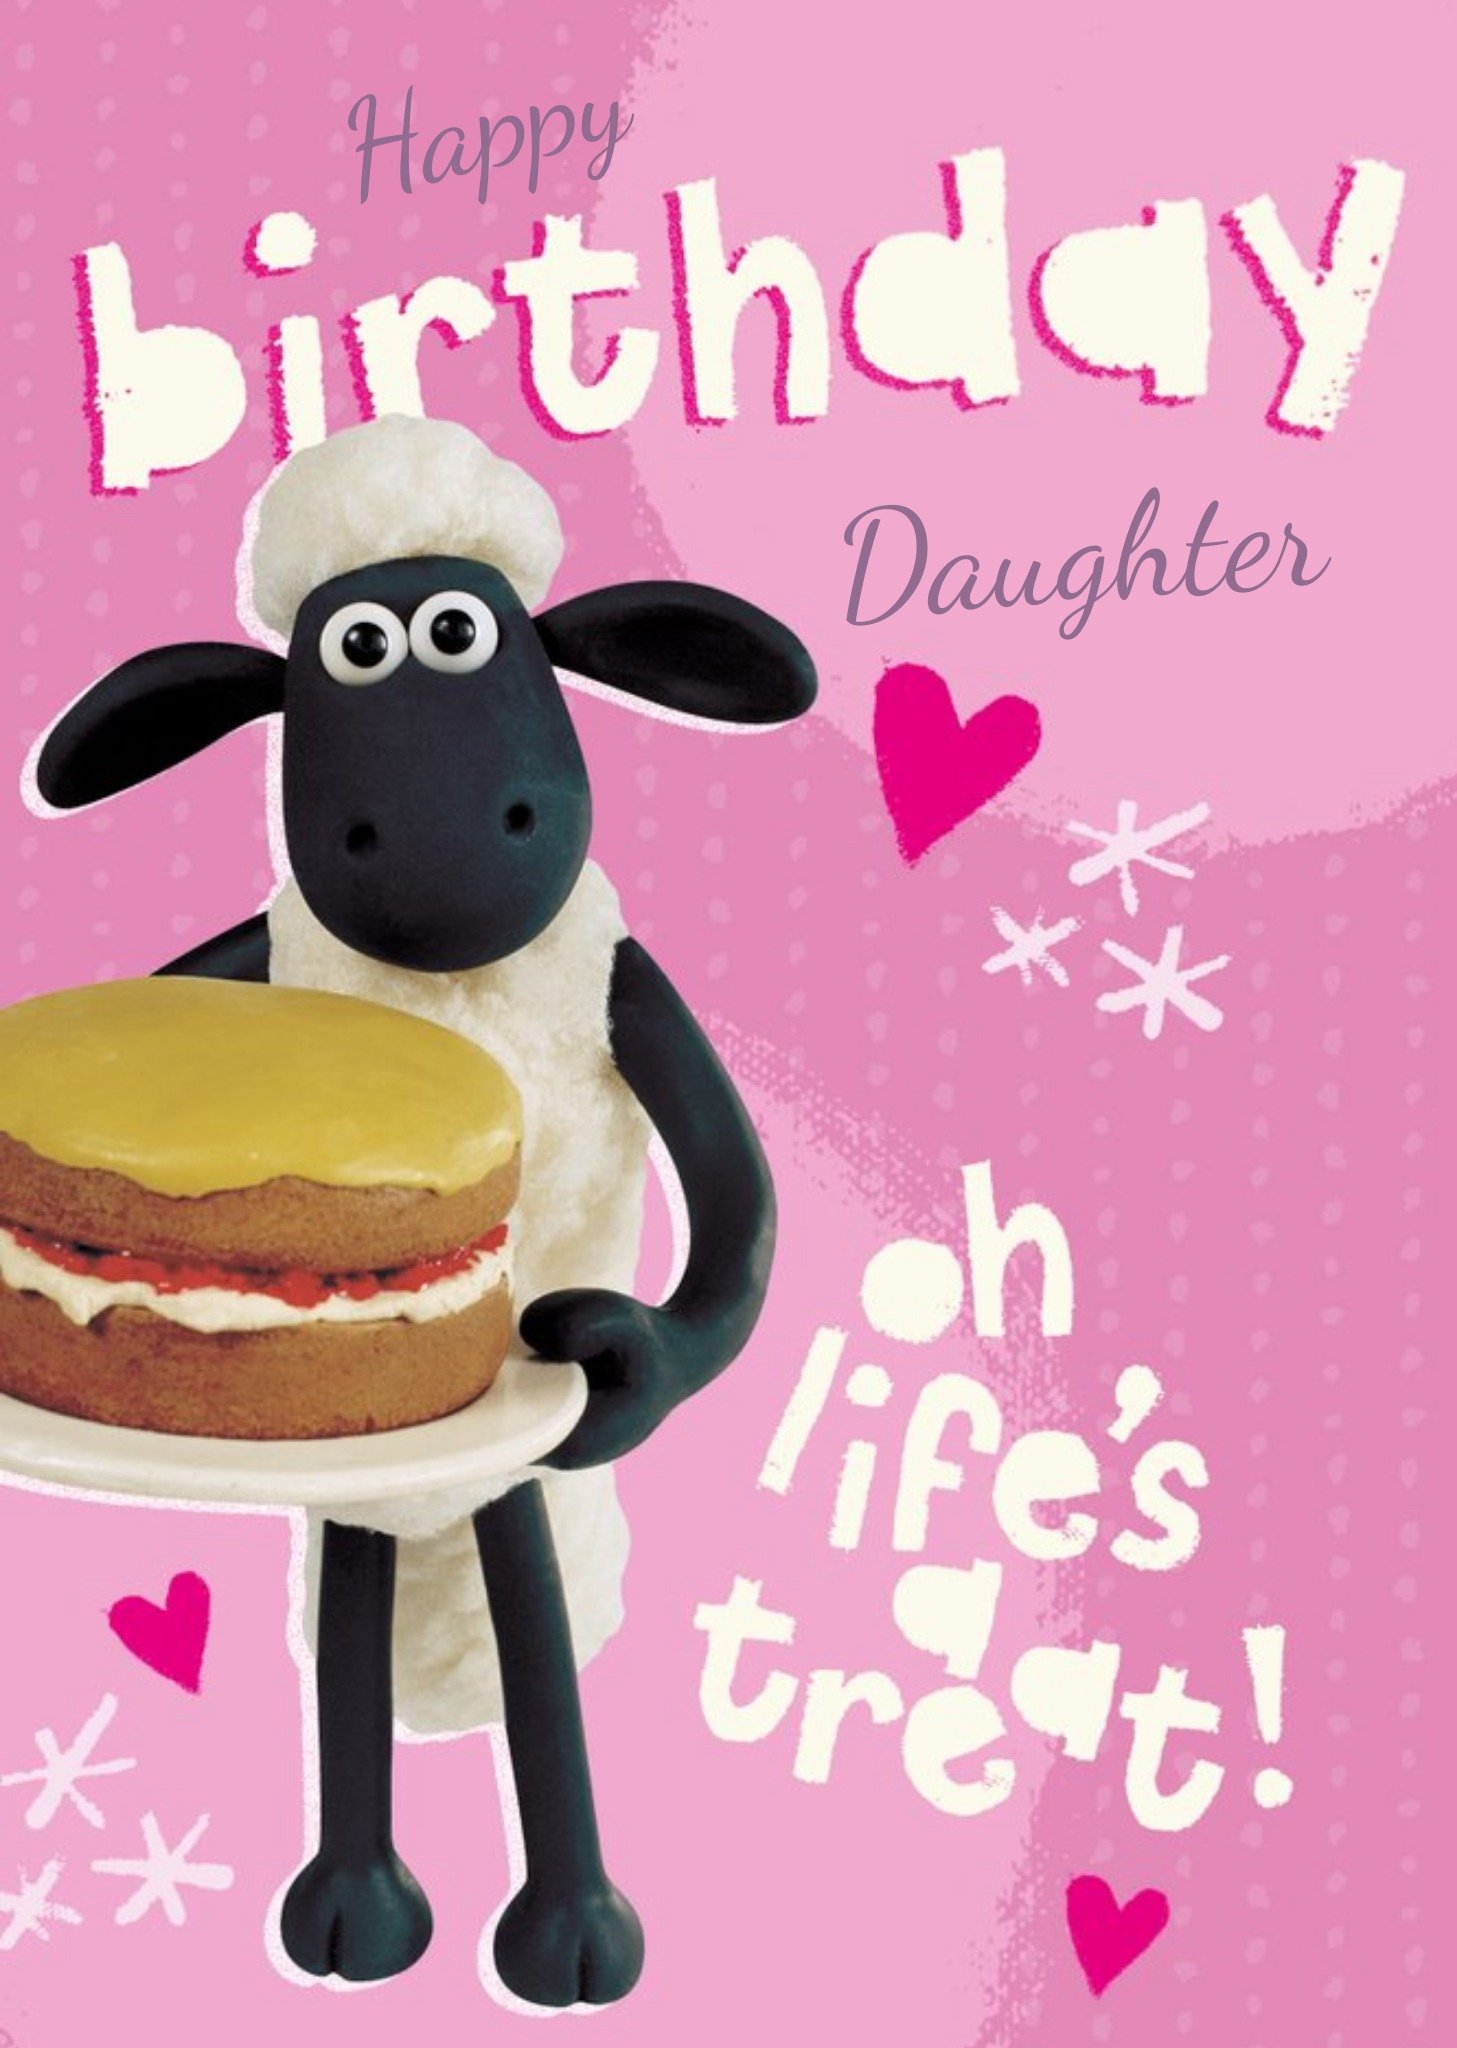 Wallace And Gromit Shaun The Sheep Daughter Life's A Treat Birthday Card, Large